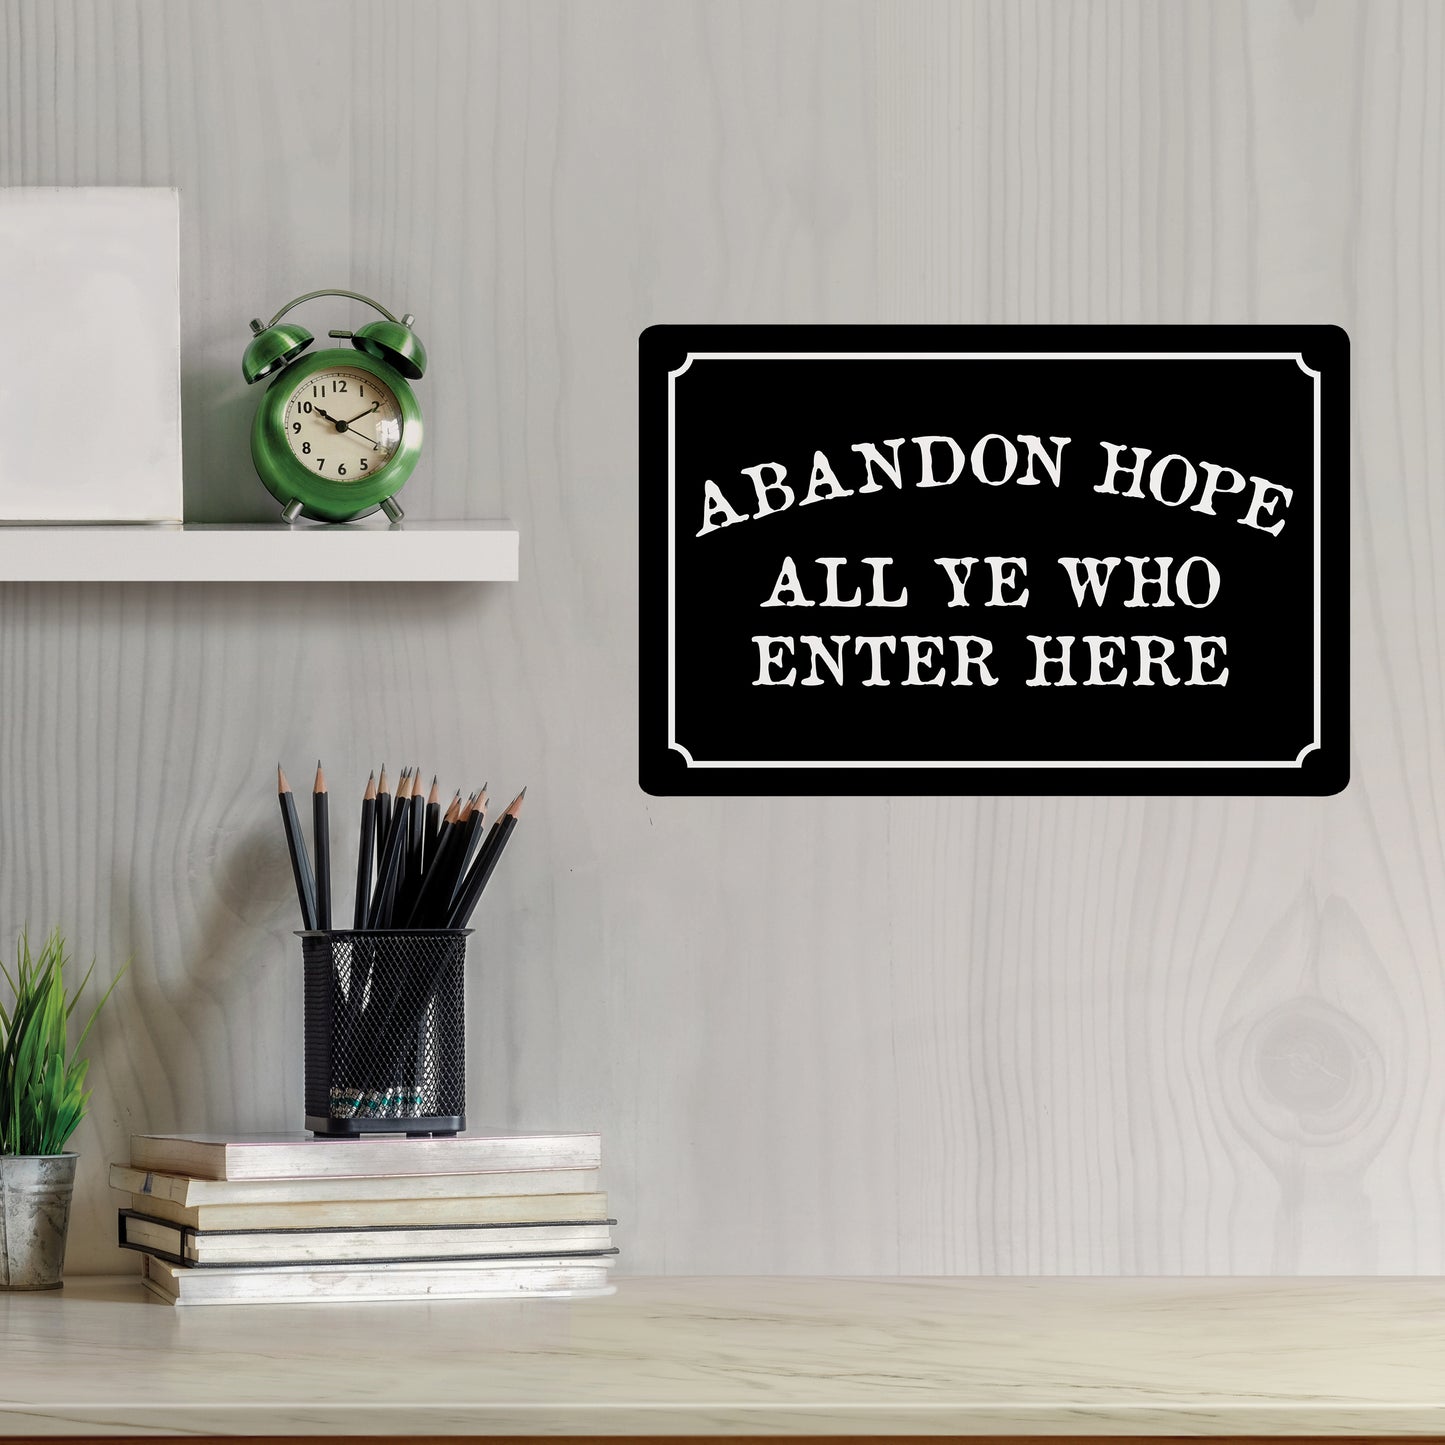 Abandon Hope All Ye Who Enter Here - 8" x 12" Funny Plastic (PVC) Sign